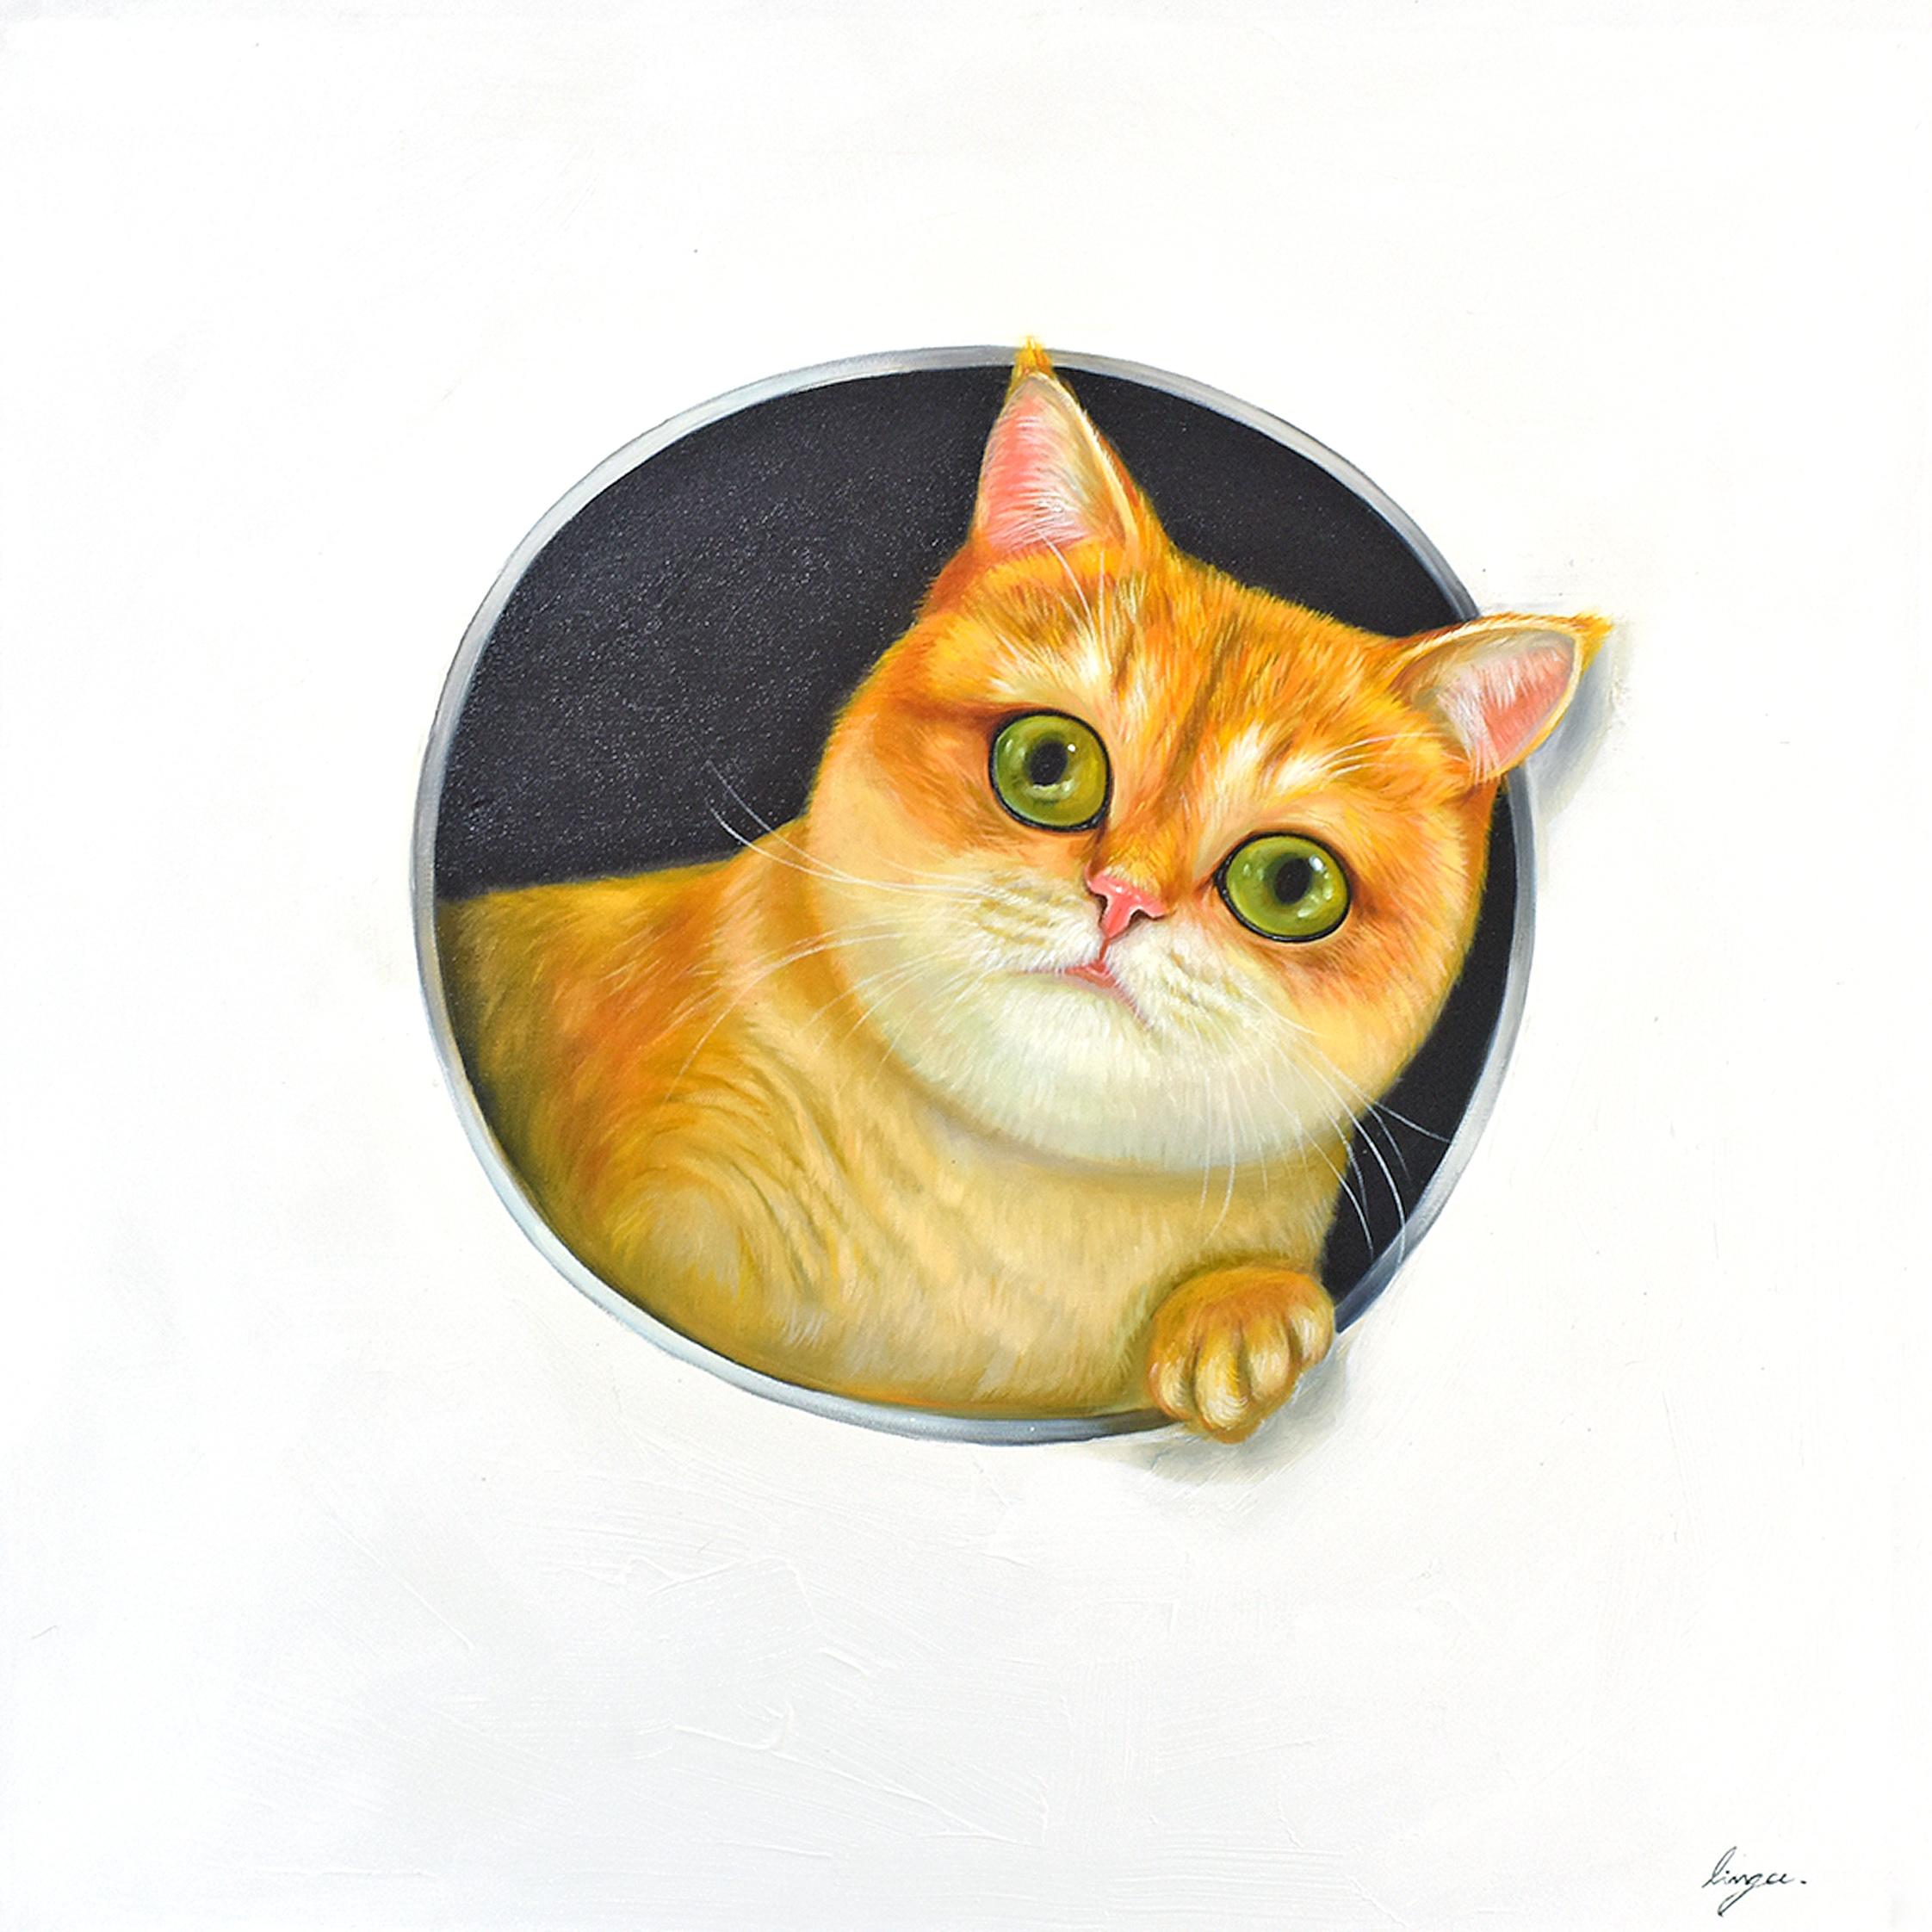 Lingee Bangkhuntod Animal Painting - Peeking Cats 4. Cat looking Through a Hole. Adorable Orange Cat Oil Painting